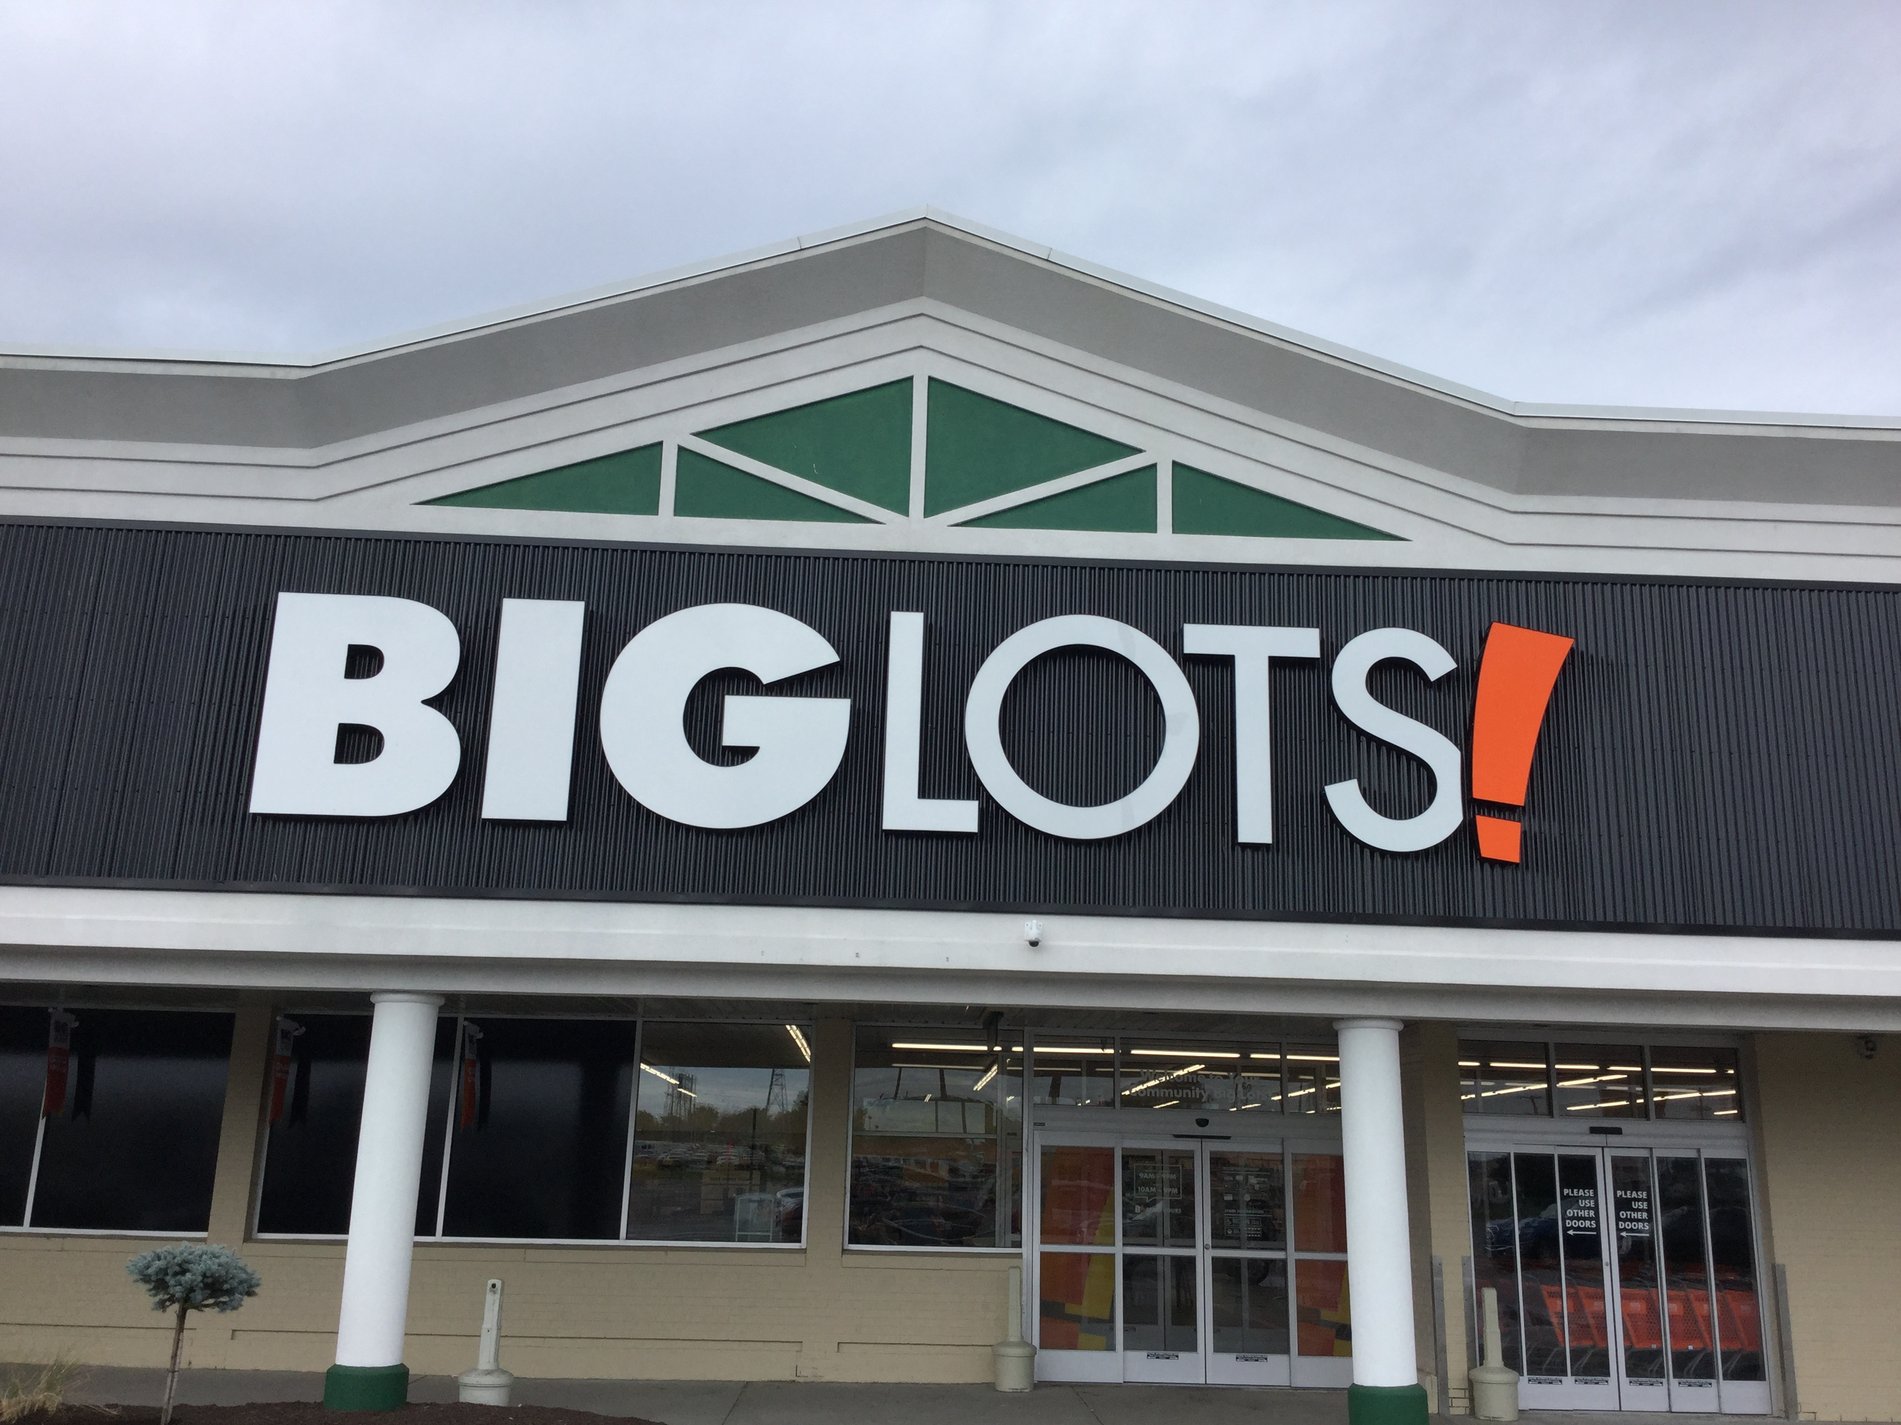 Visit The Big Lots in Tonawanda, NY Located on Young St